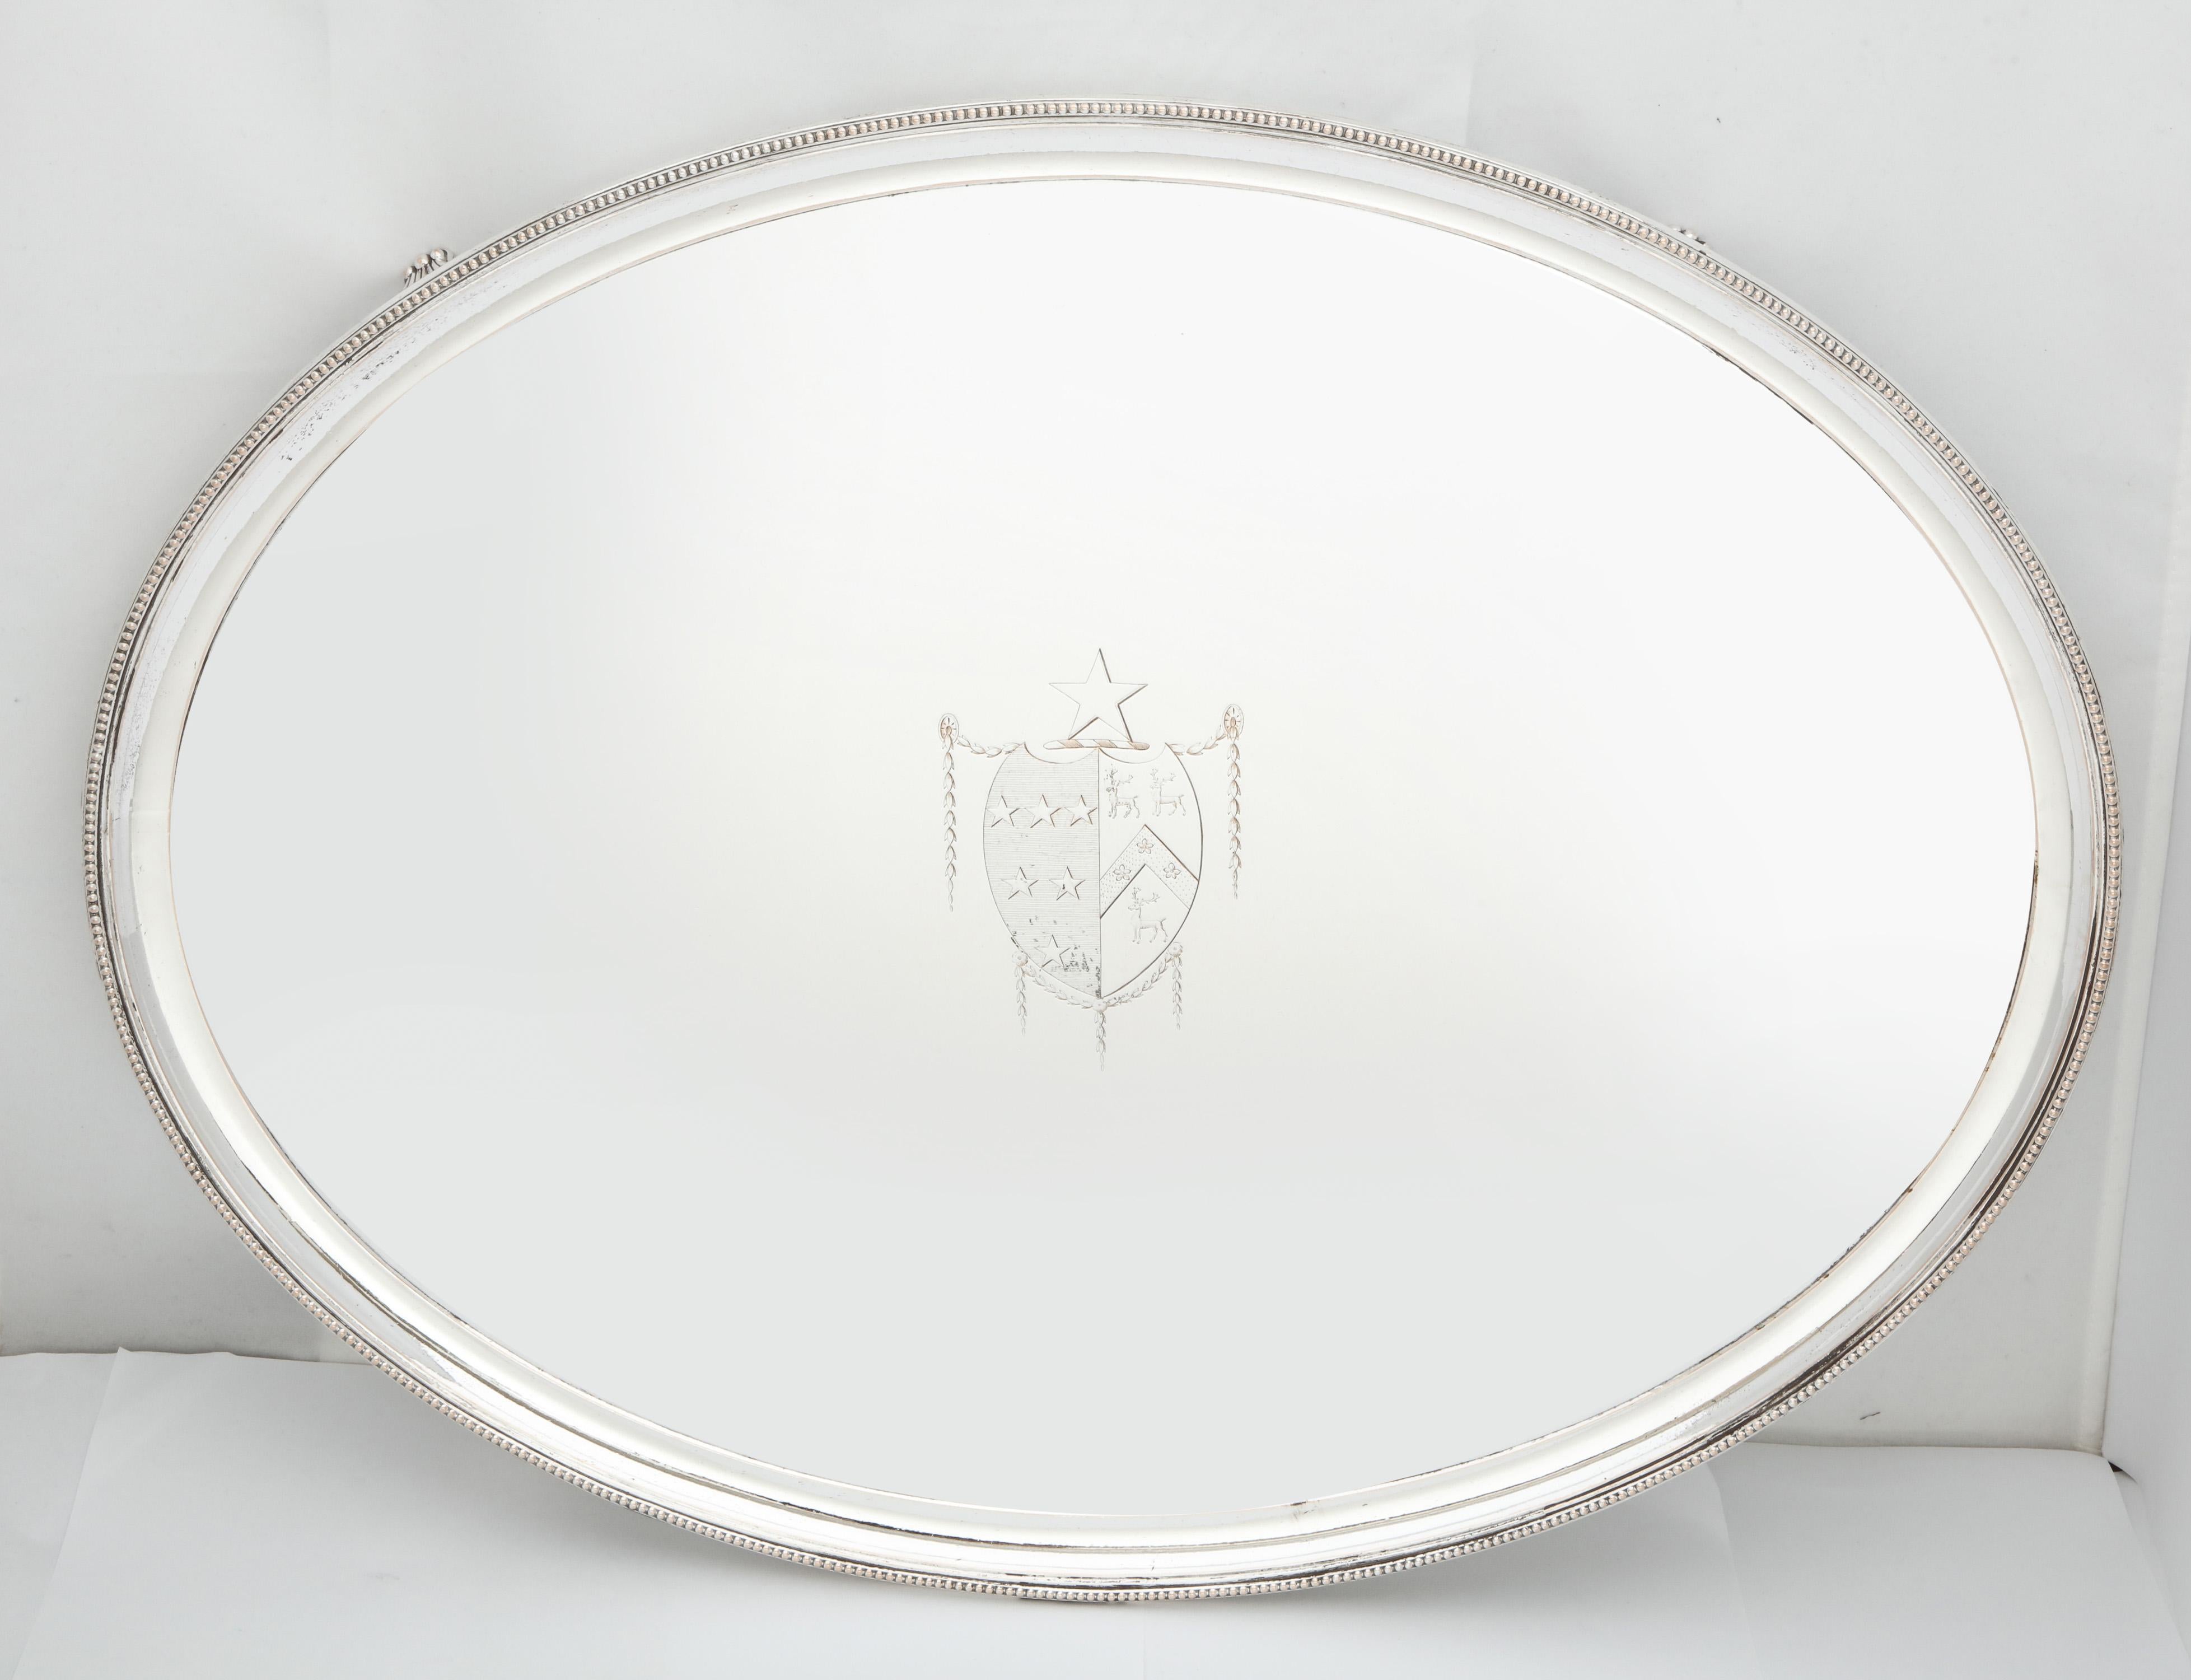 Large, Georgian (George III), Sheffield plated (Silver on copper), footed tray with central coat of arms, England, circa 1775. Border is beaded, has shell-form feet. Measures 20 inches wide x 15 1/2 inches deep x 1 3/4 inches high. Plating is in